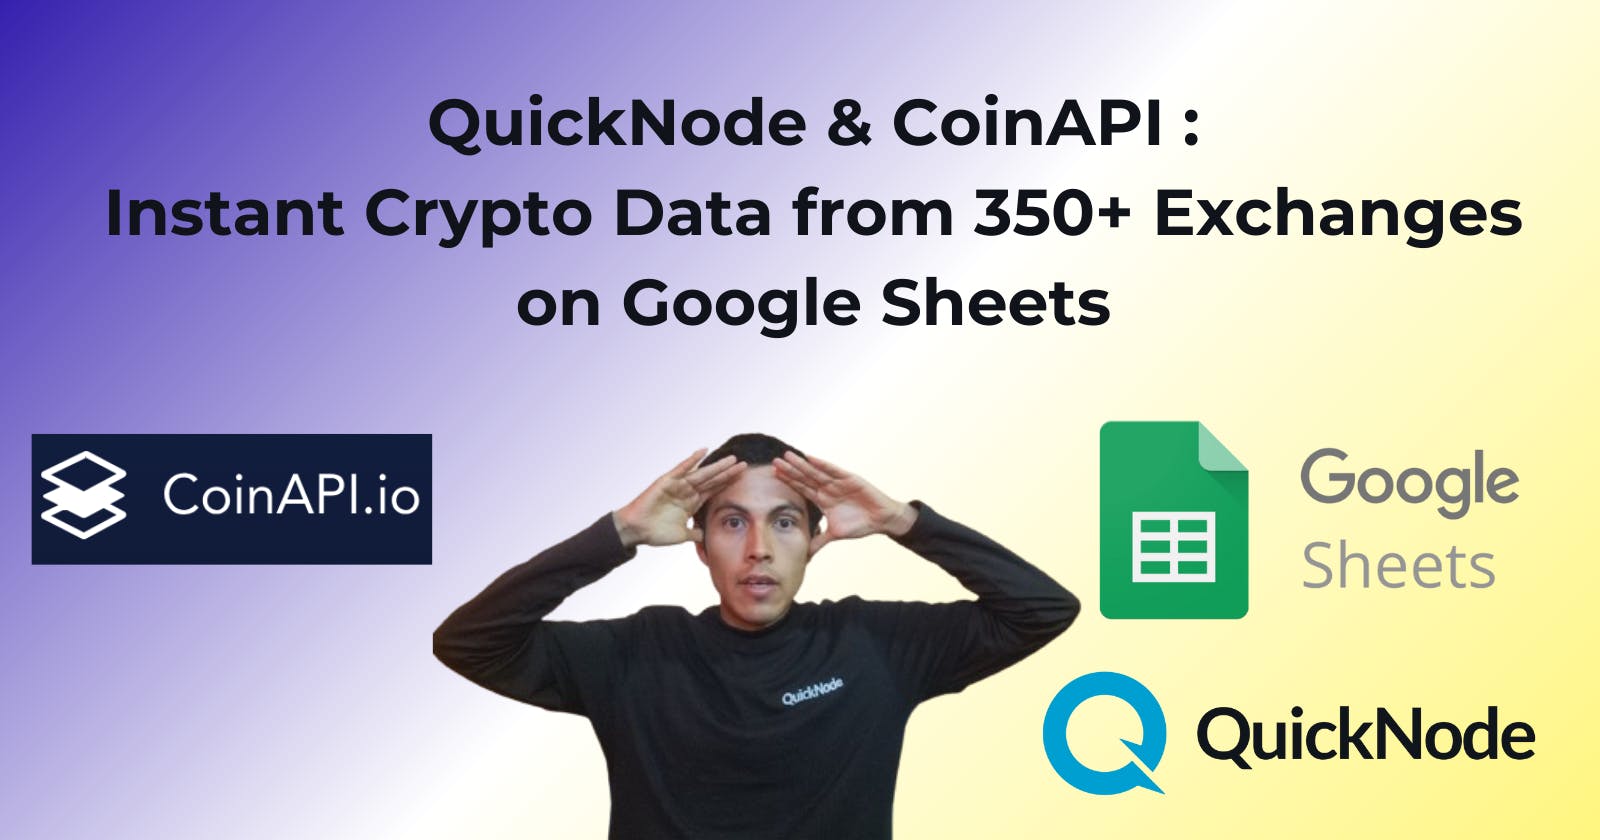 QuickNode & CoinAPI: Instant Crypto Data from 350+ Exchanges on Google Sheets